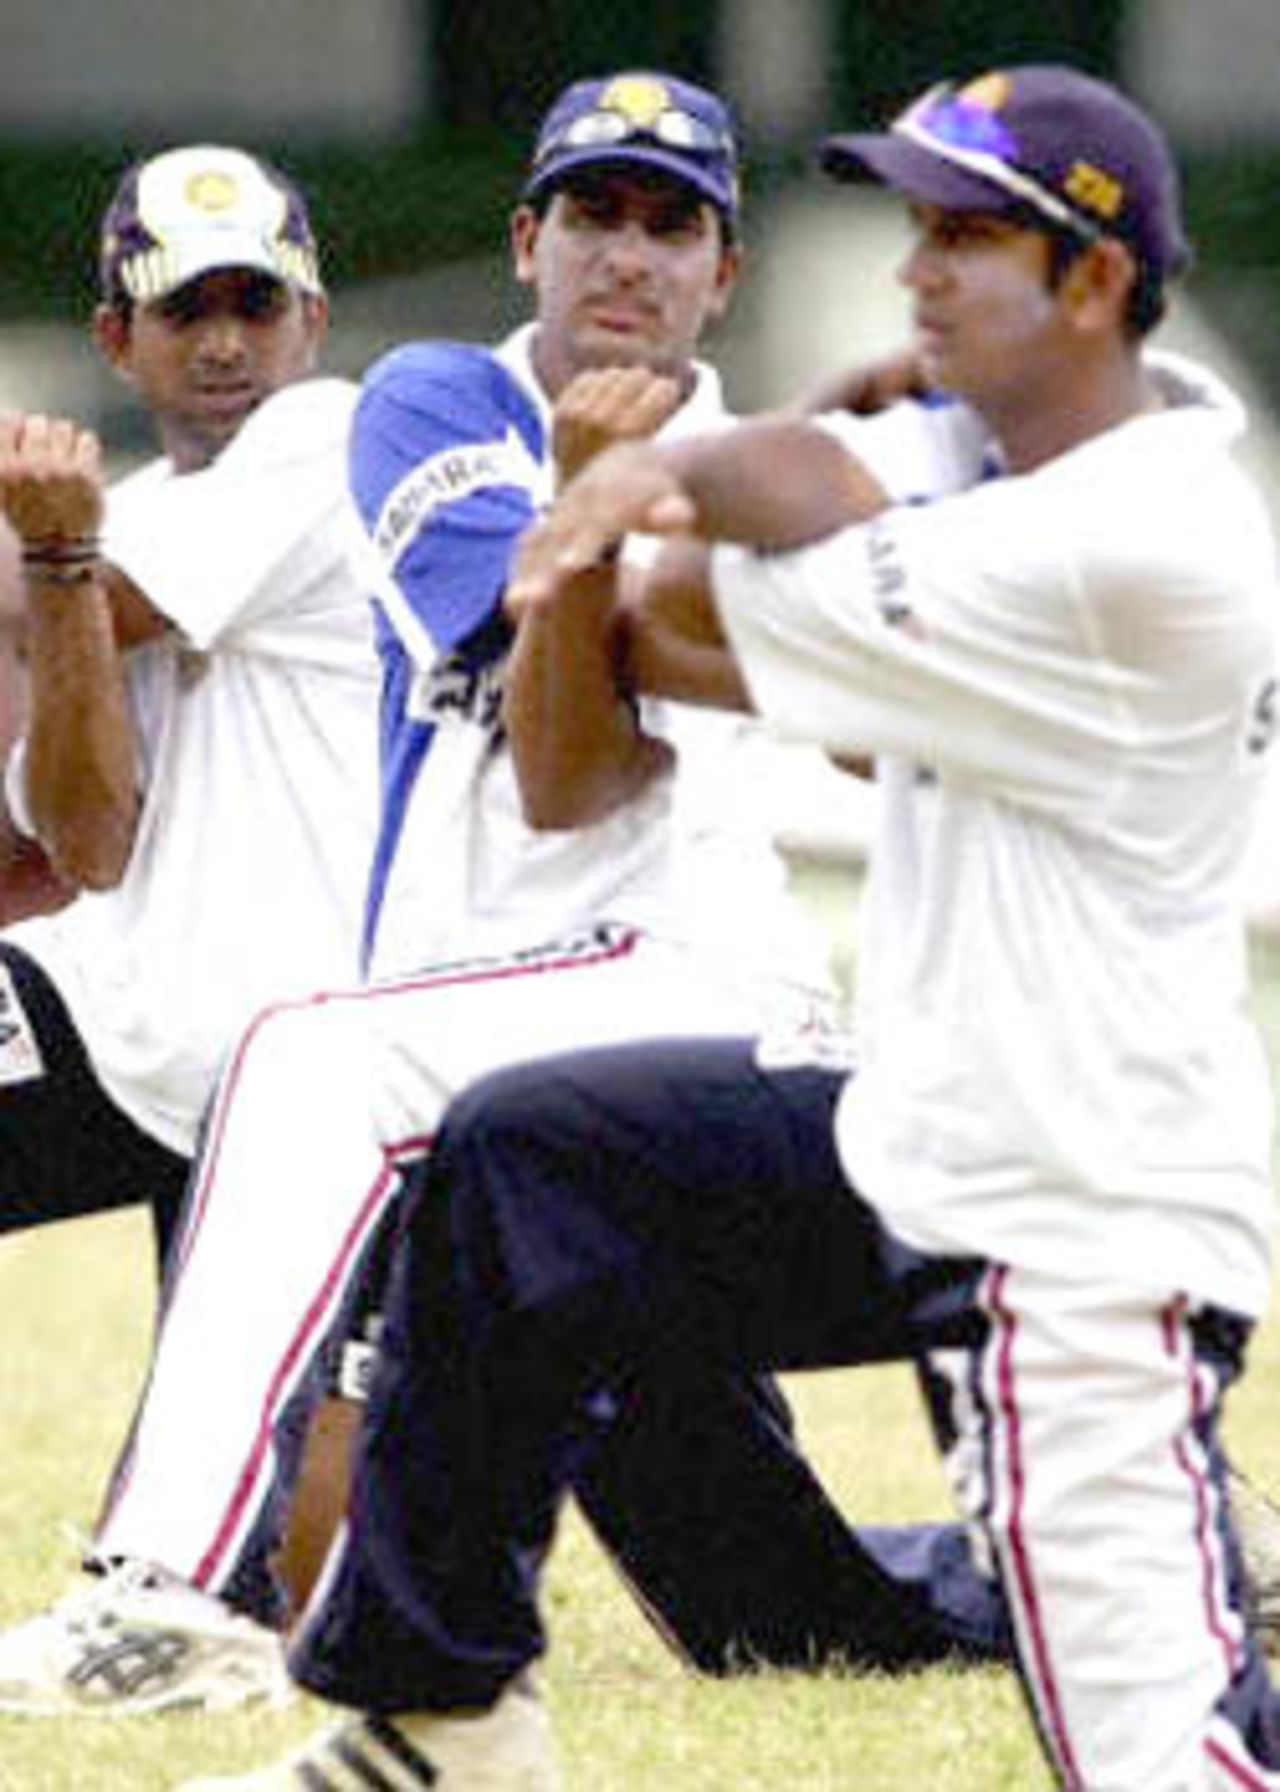 21 August 2001: India in Sri Lanka, Practise Session at the Asgiriya Cricket Stadium in Kandy before the 2nd Test